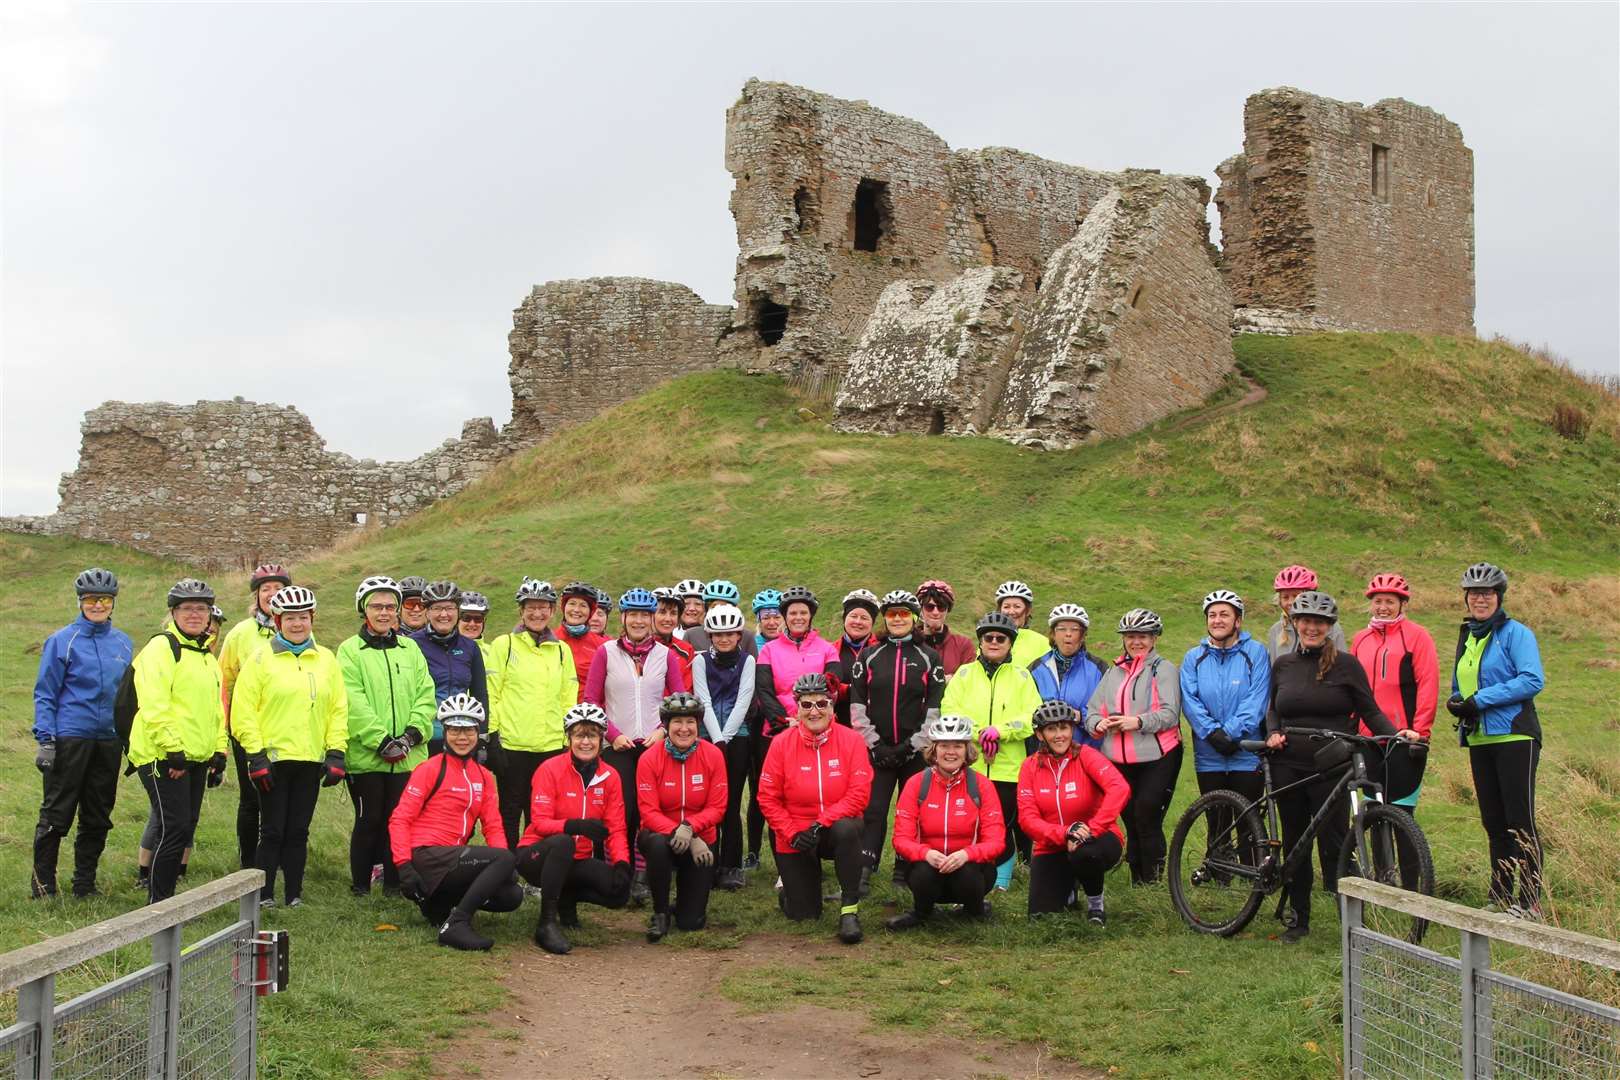 Nairn and Elgin Breeze ride out with Duffus Castle.